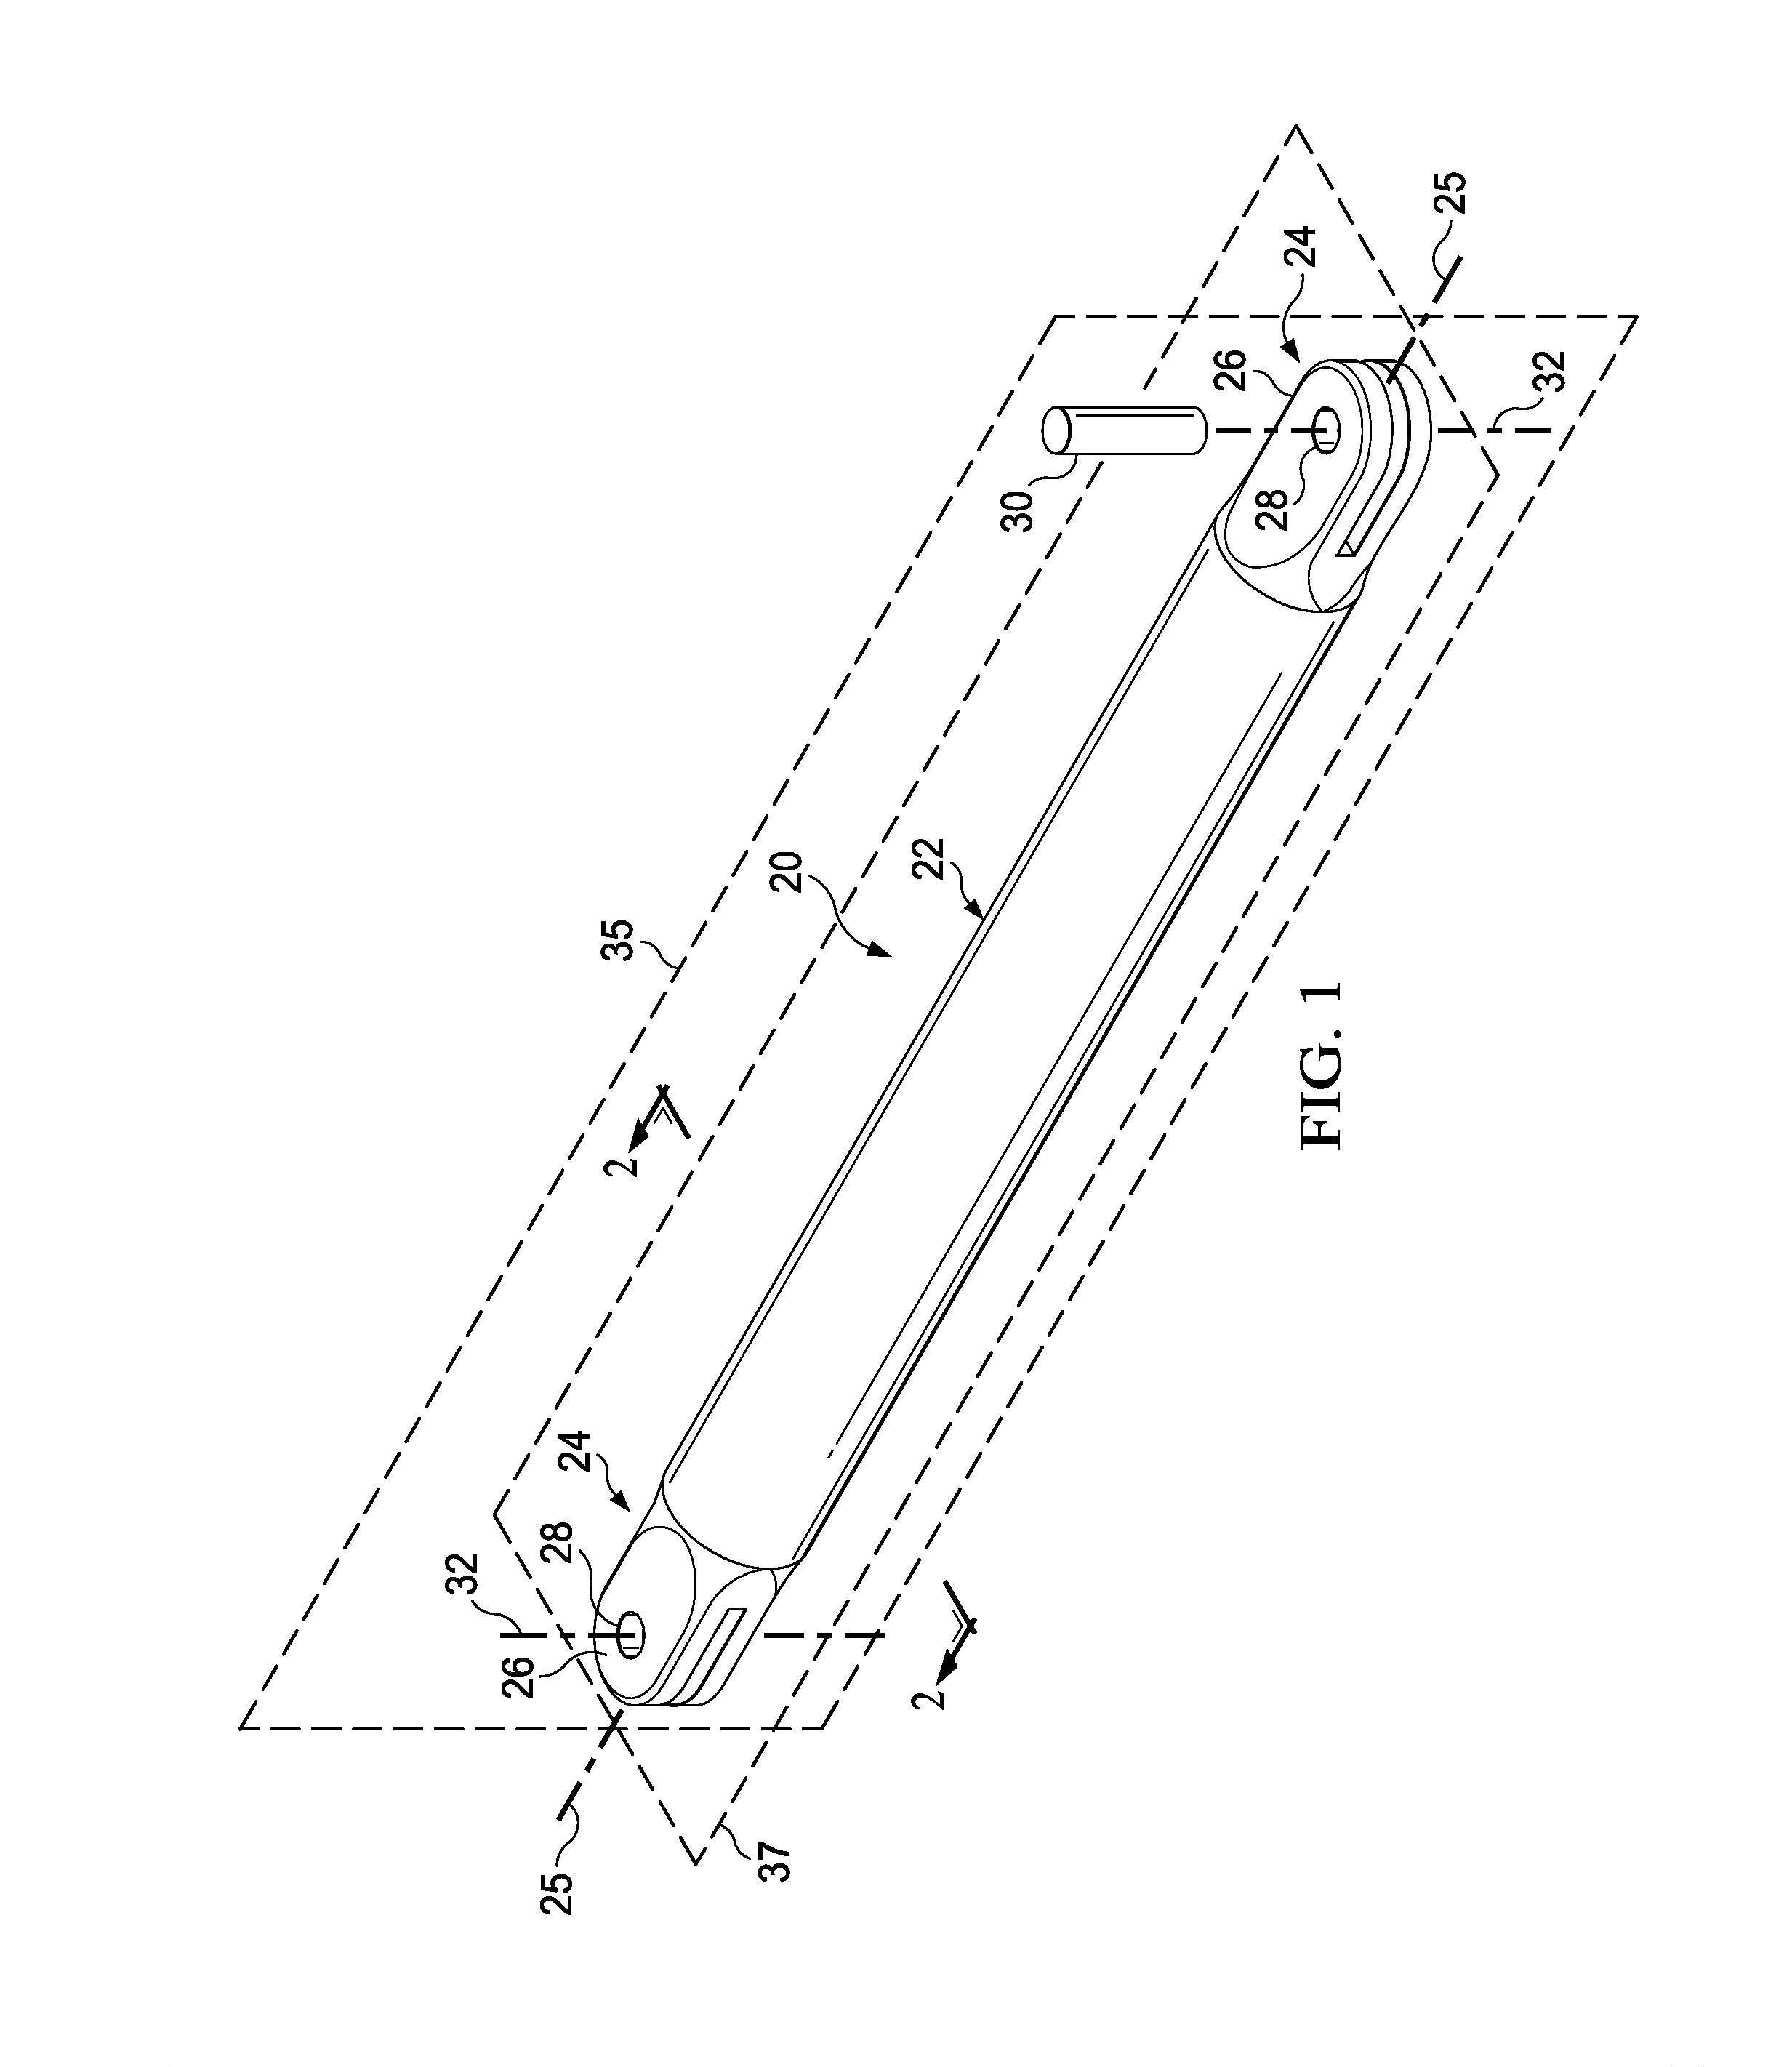 Composite Columnar Structure Having Co-Bonded Reinforcement and Fabrication Method